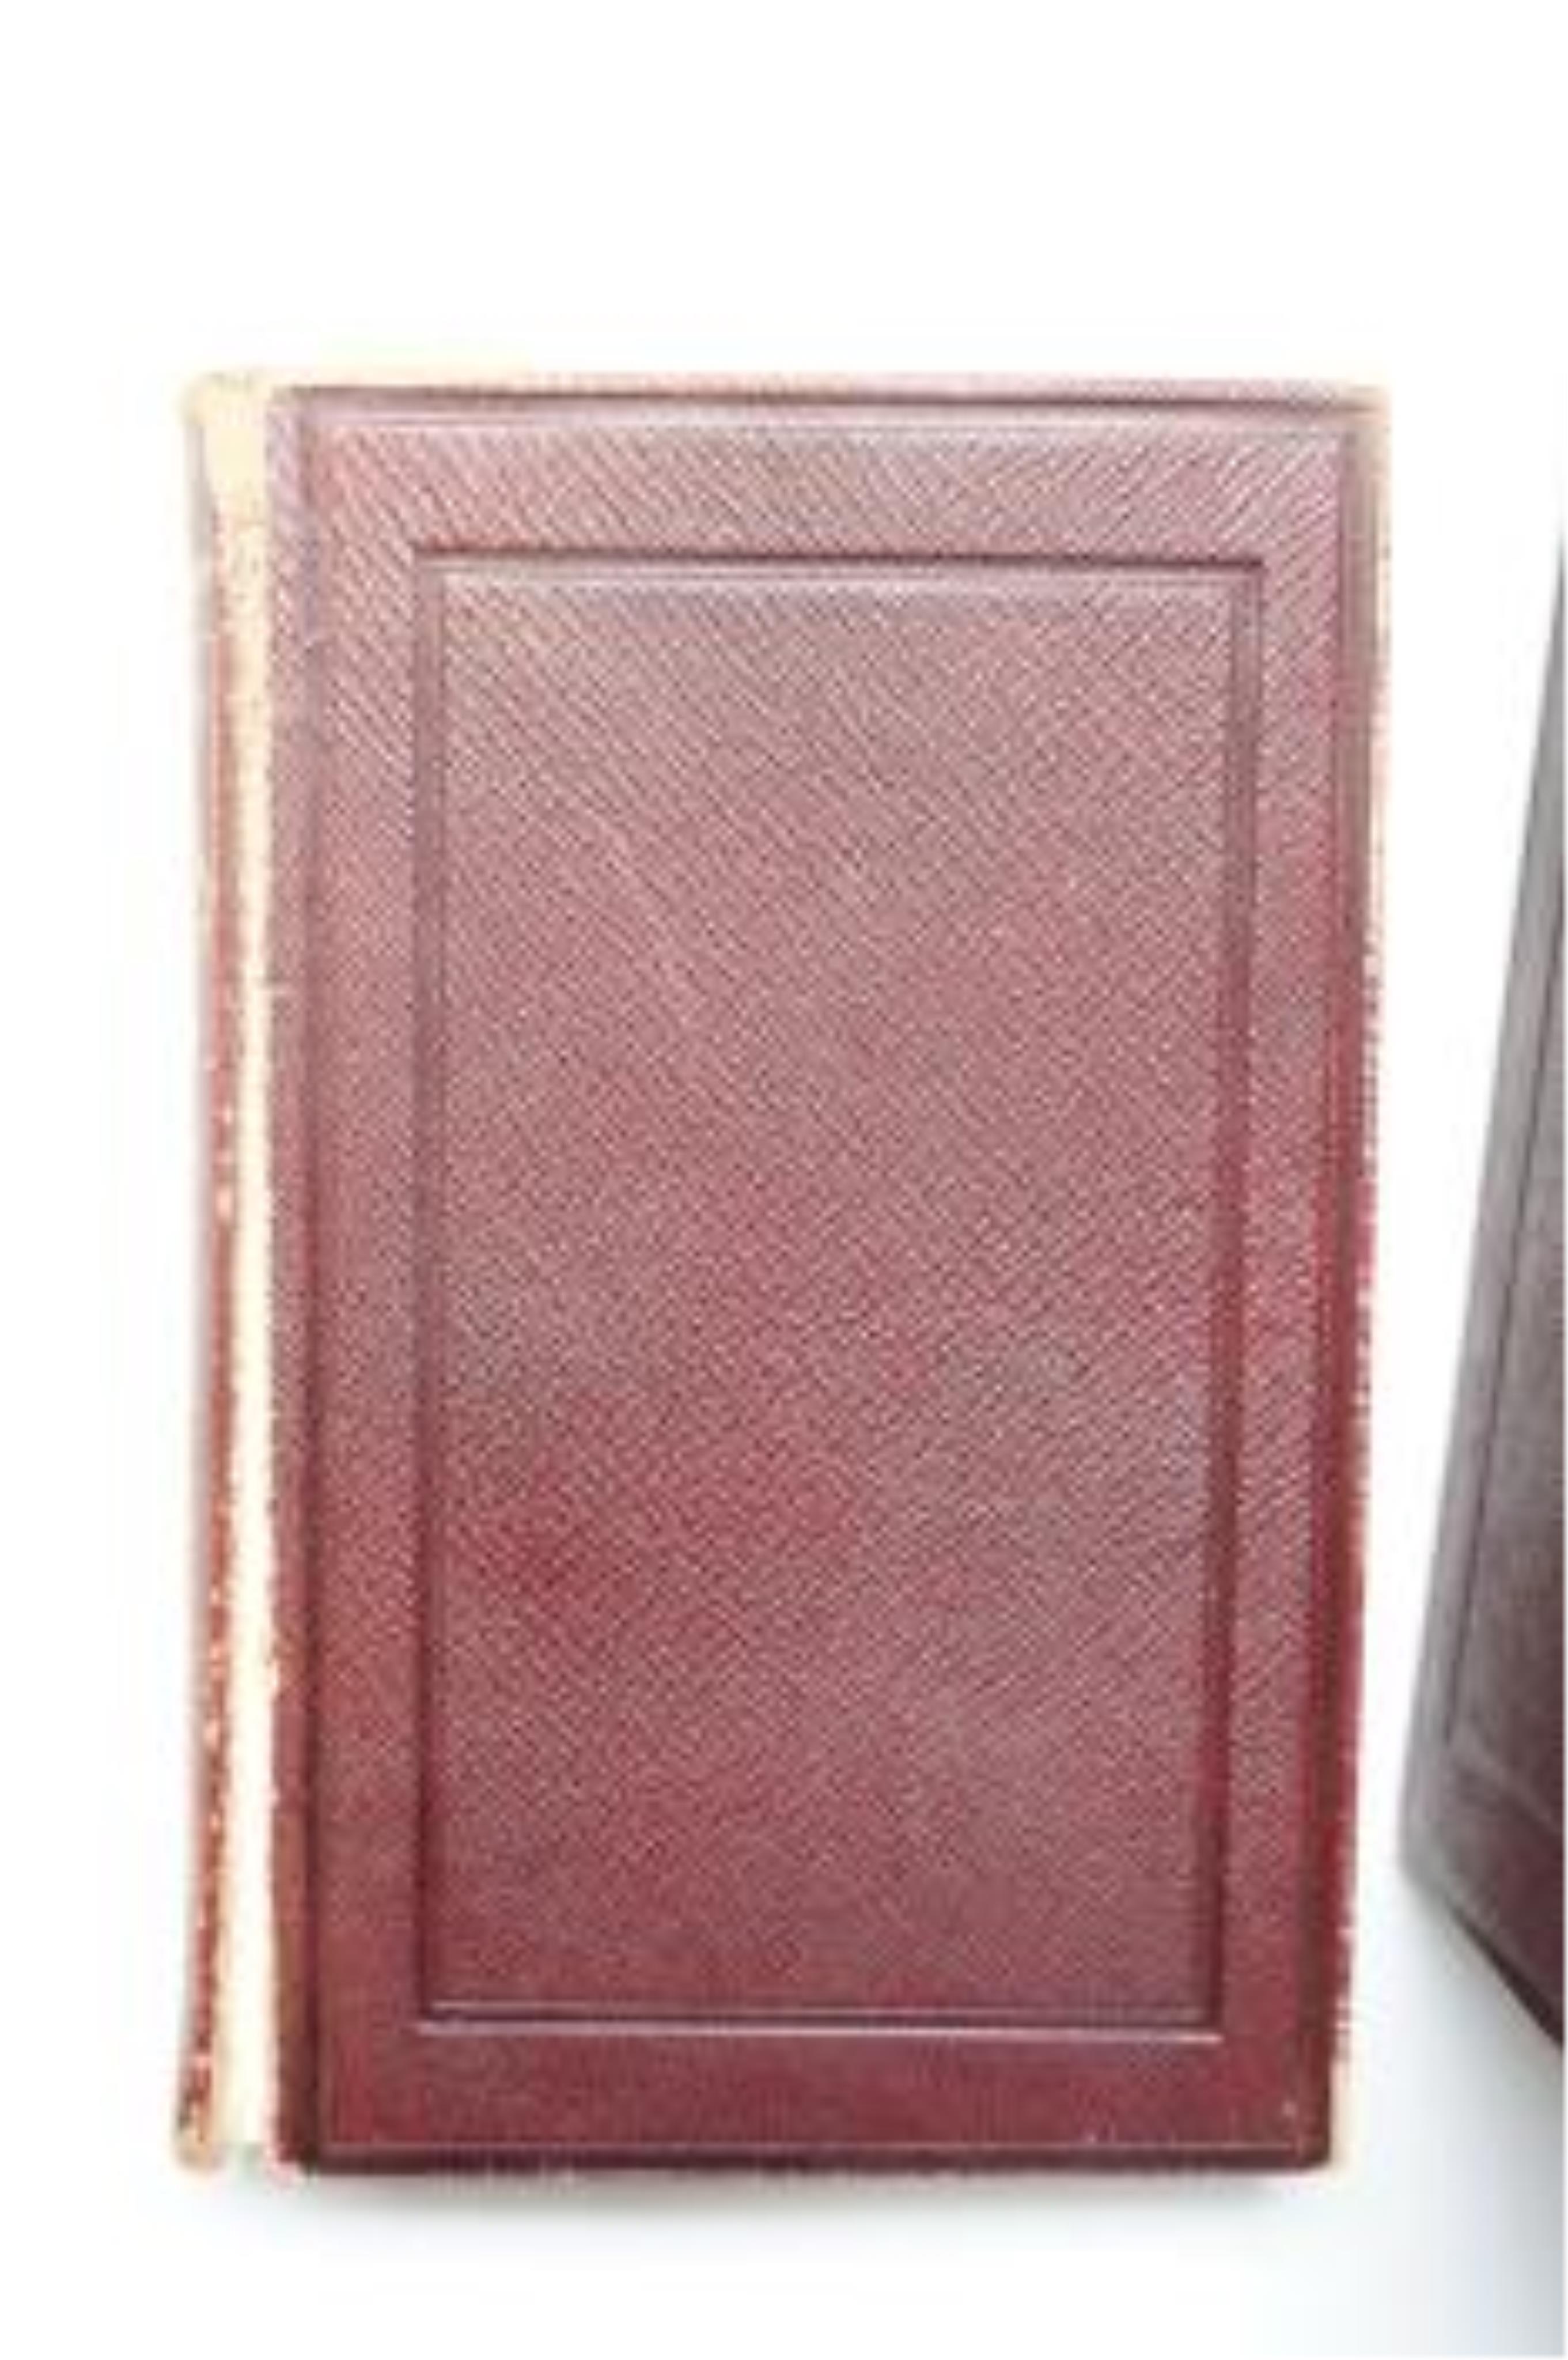 Medwin, Thomas - Conversations of Lord Byron noted During a Residence at Pisa, in the years 1821 and 1822, 2 vols, 12mo, half calf, Henry Colburn and Ruchard Bentley, London, 1830; another copy - 2 vols in 1, 8vo, half c